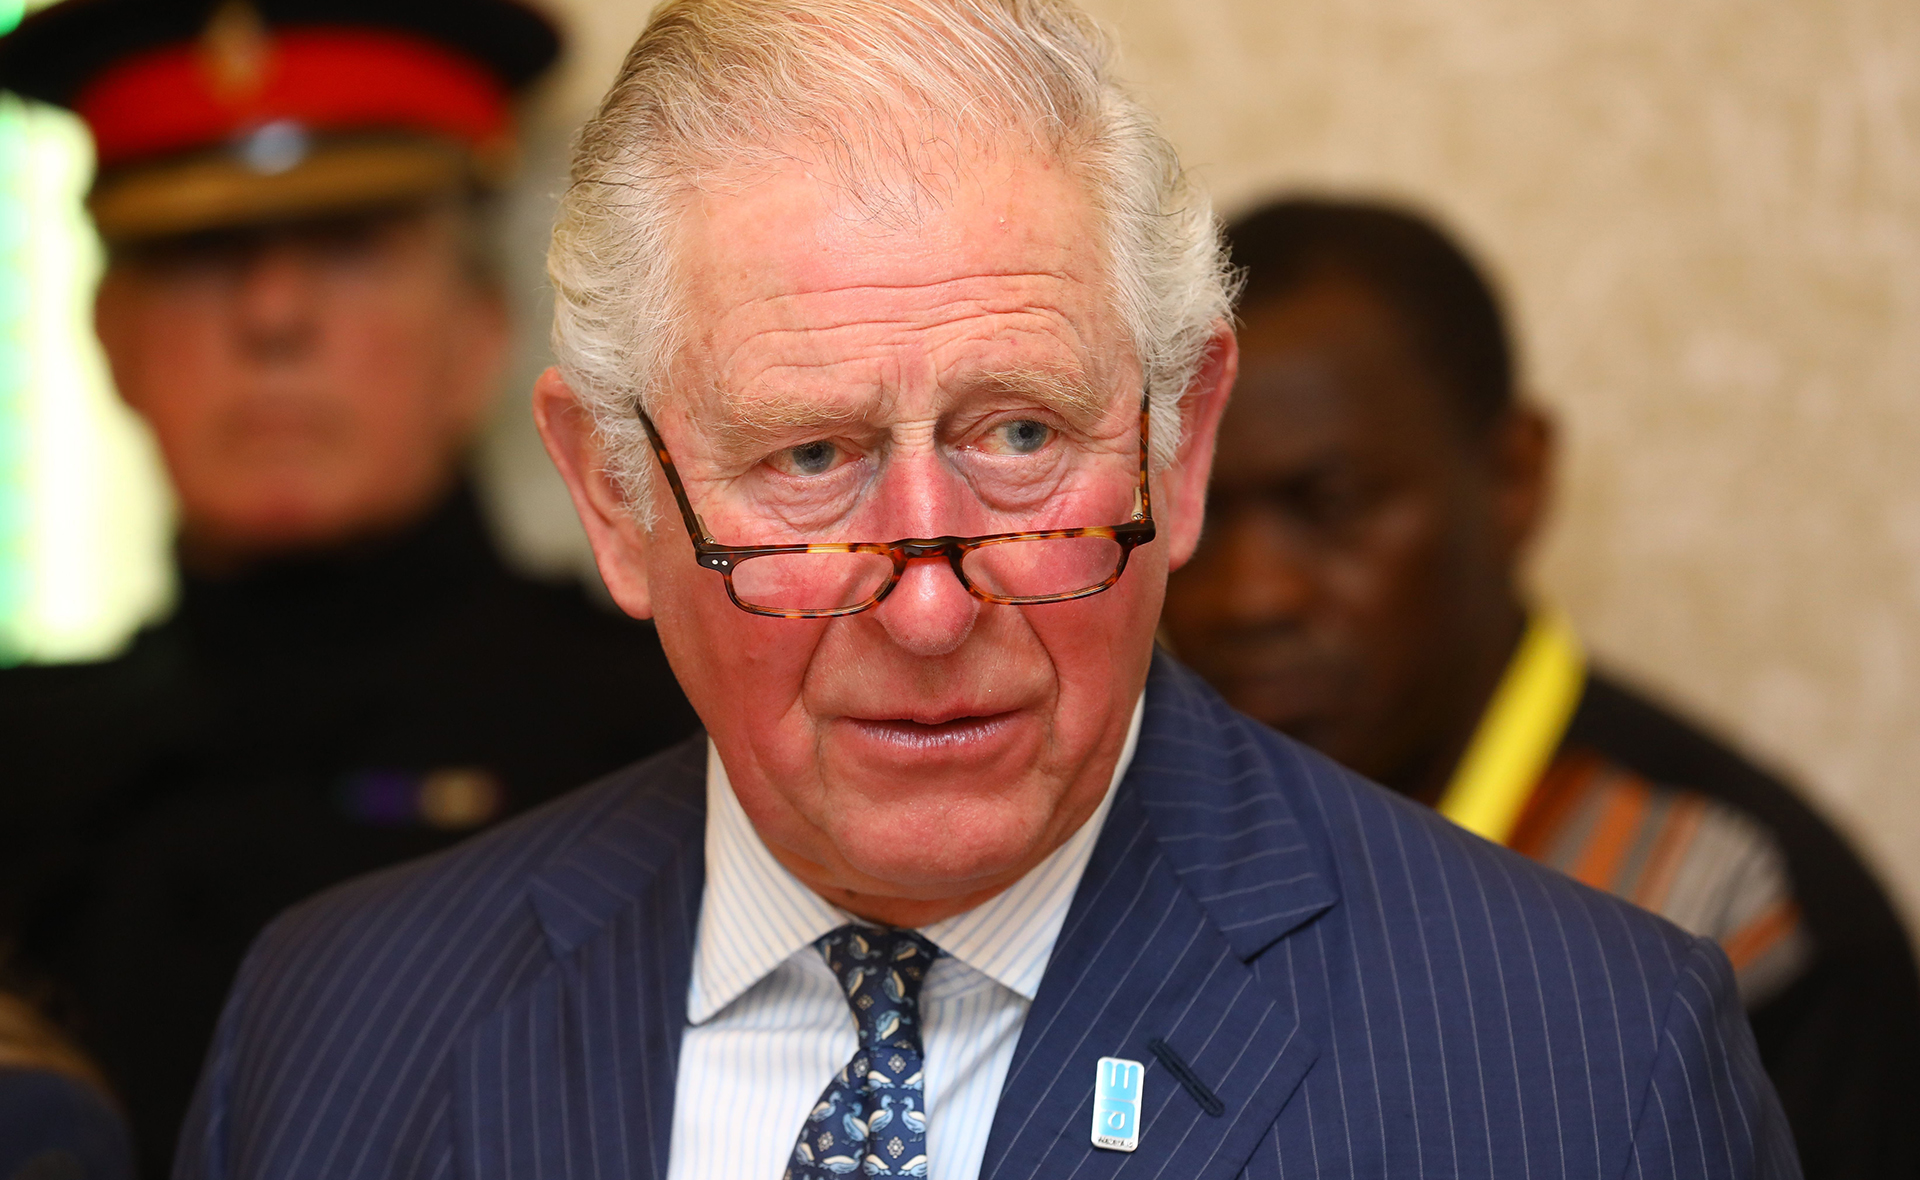 Prince Charles’ bold response to Prime Minister Scott Morrison’s climate change stance: “Is that what he says?”